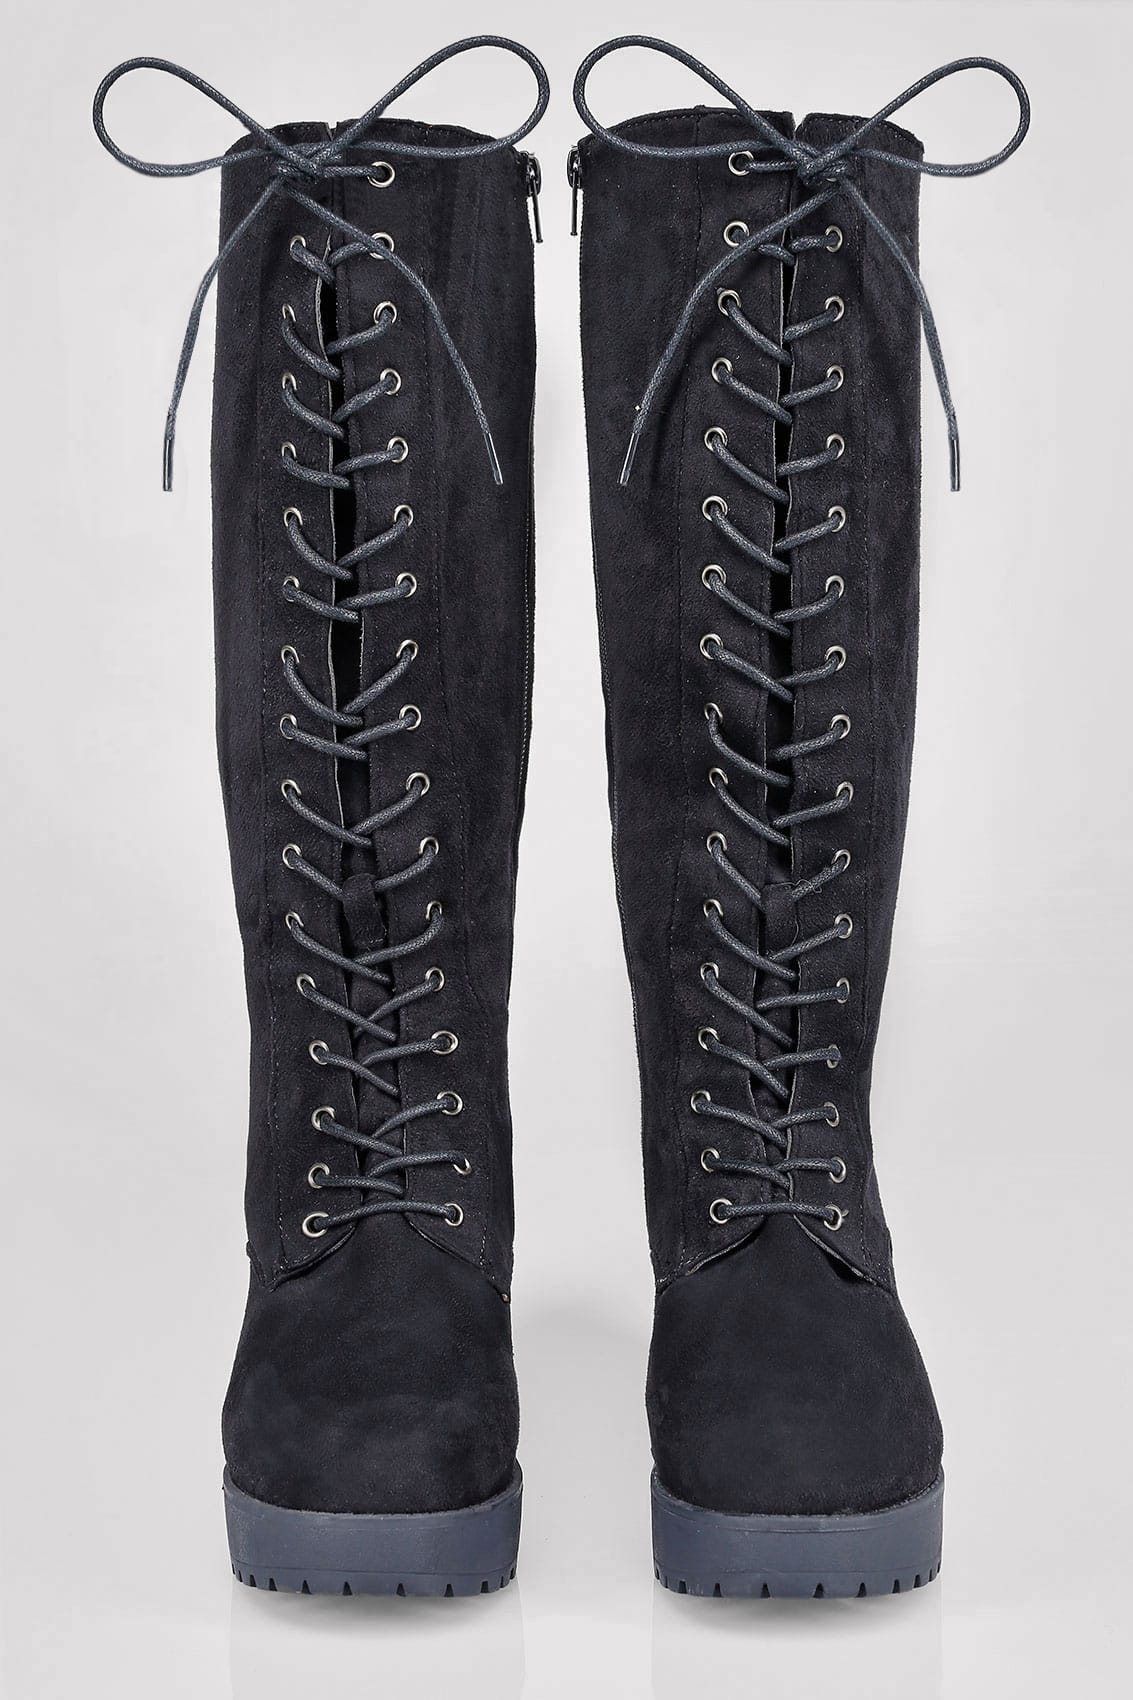 Flat black knee high lace up boots